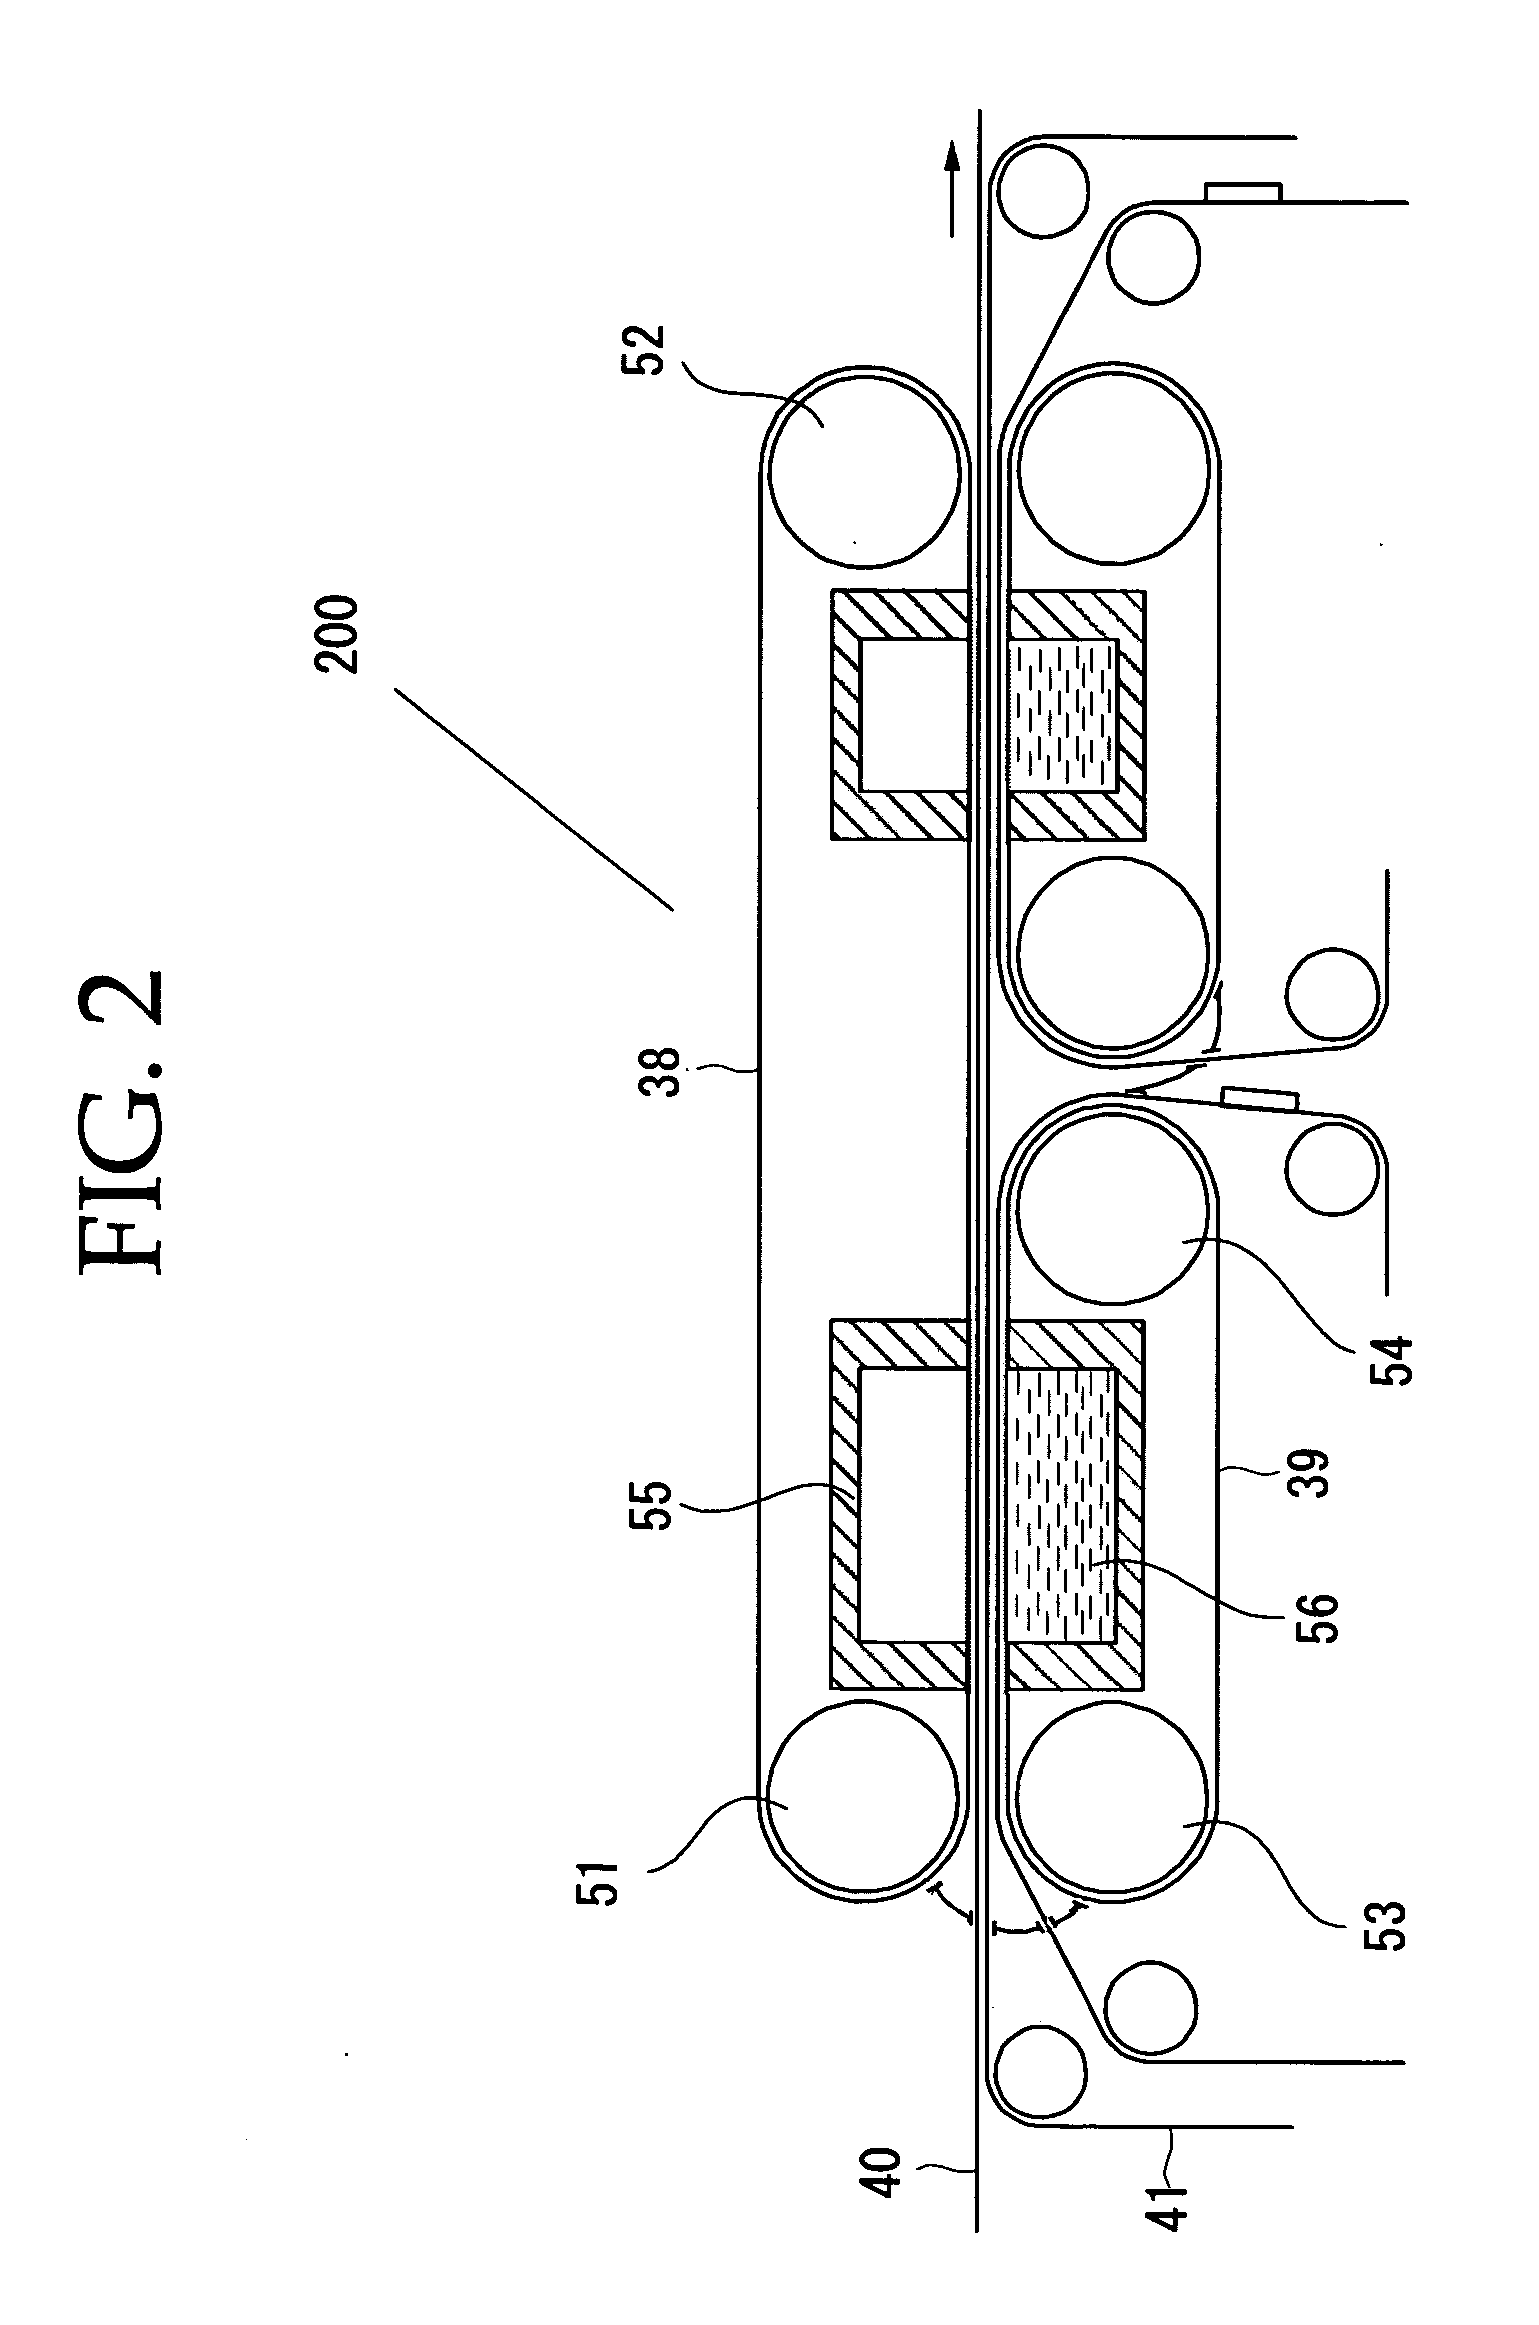 Paper, image-recording material support, and image-recording material